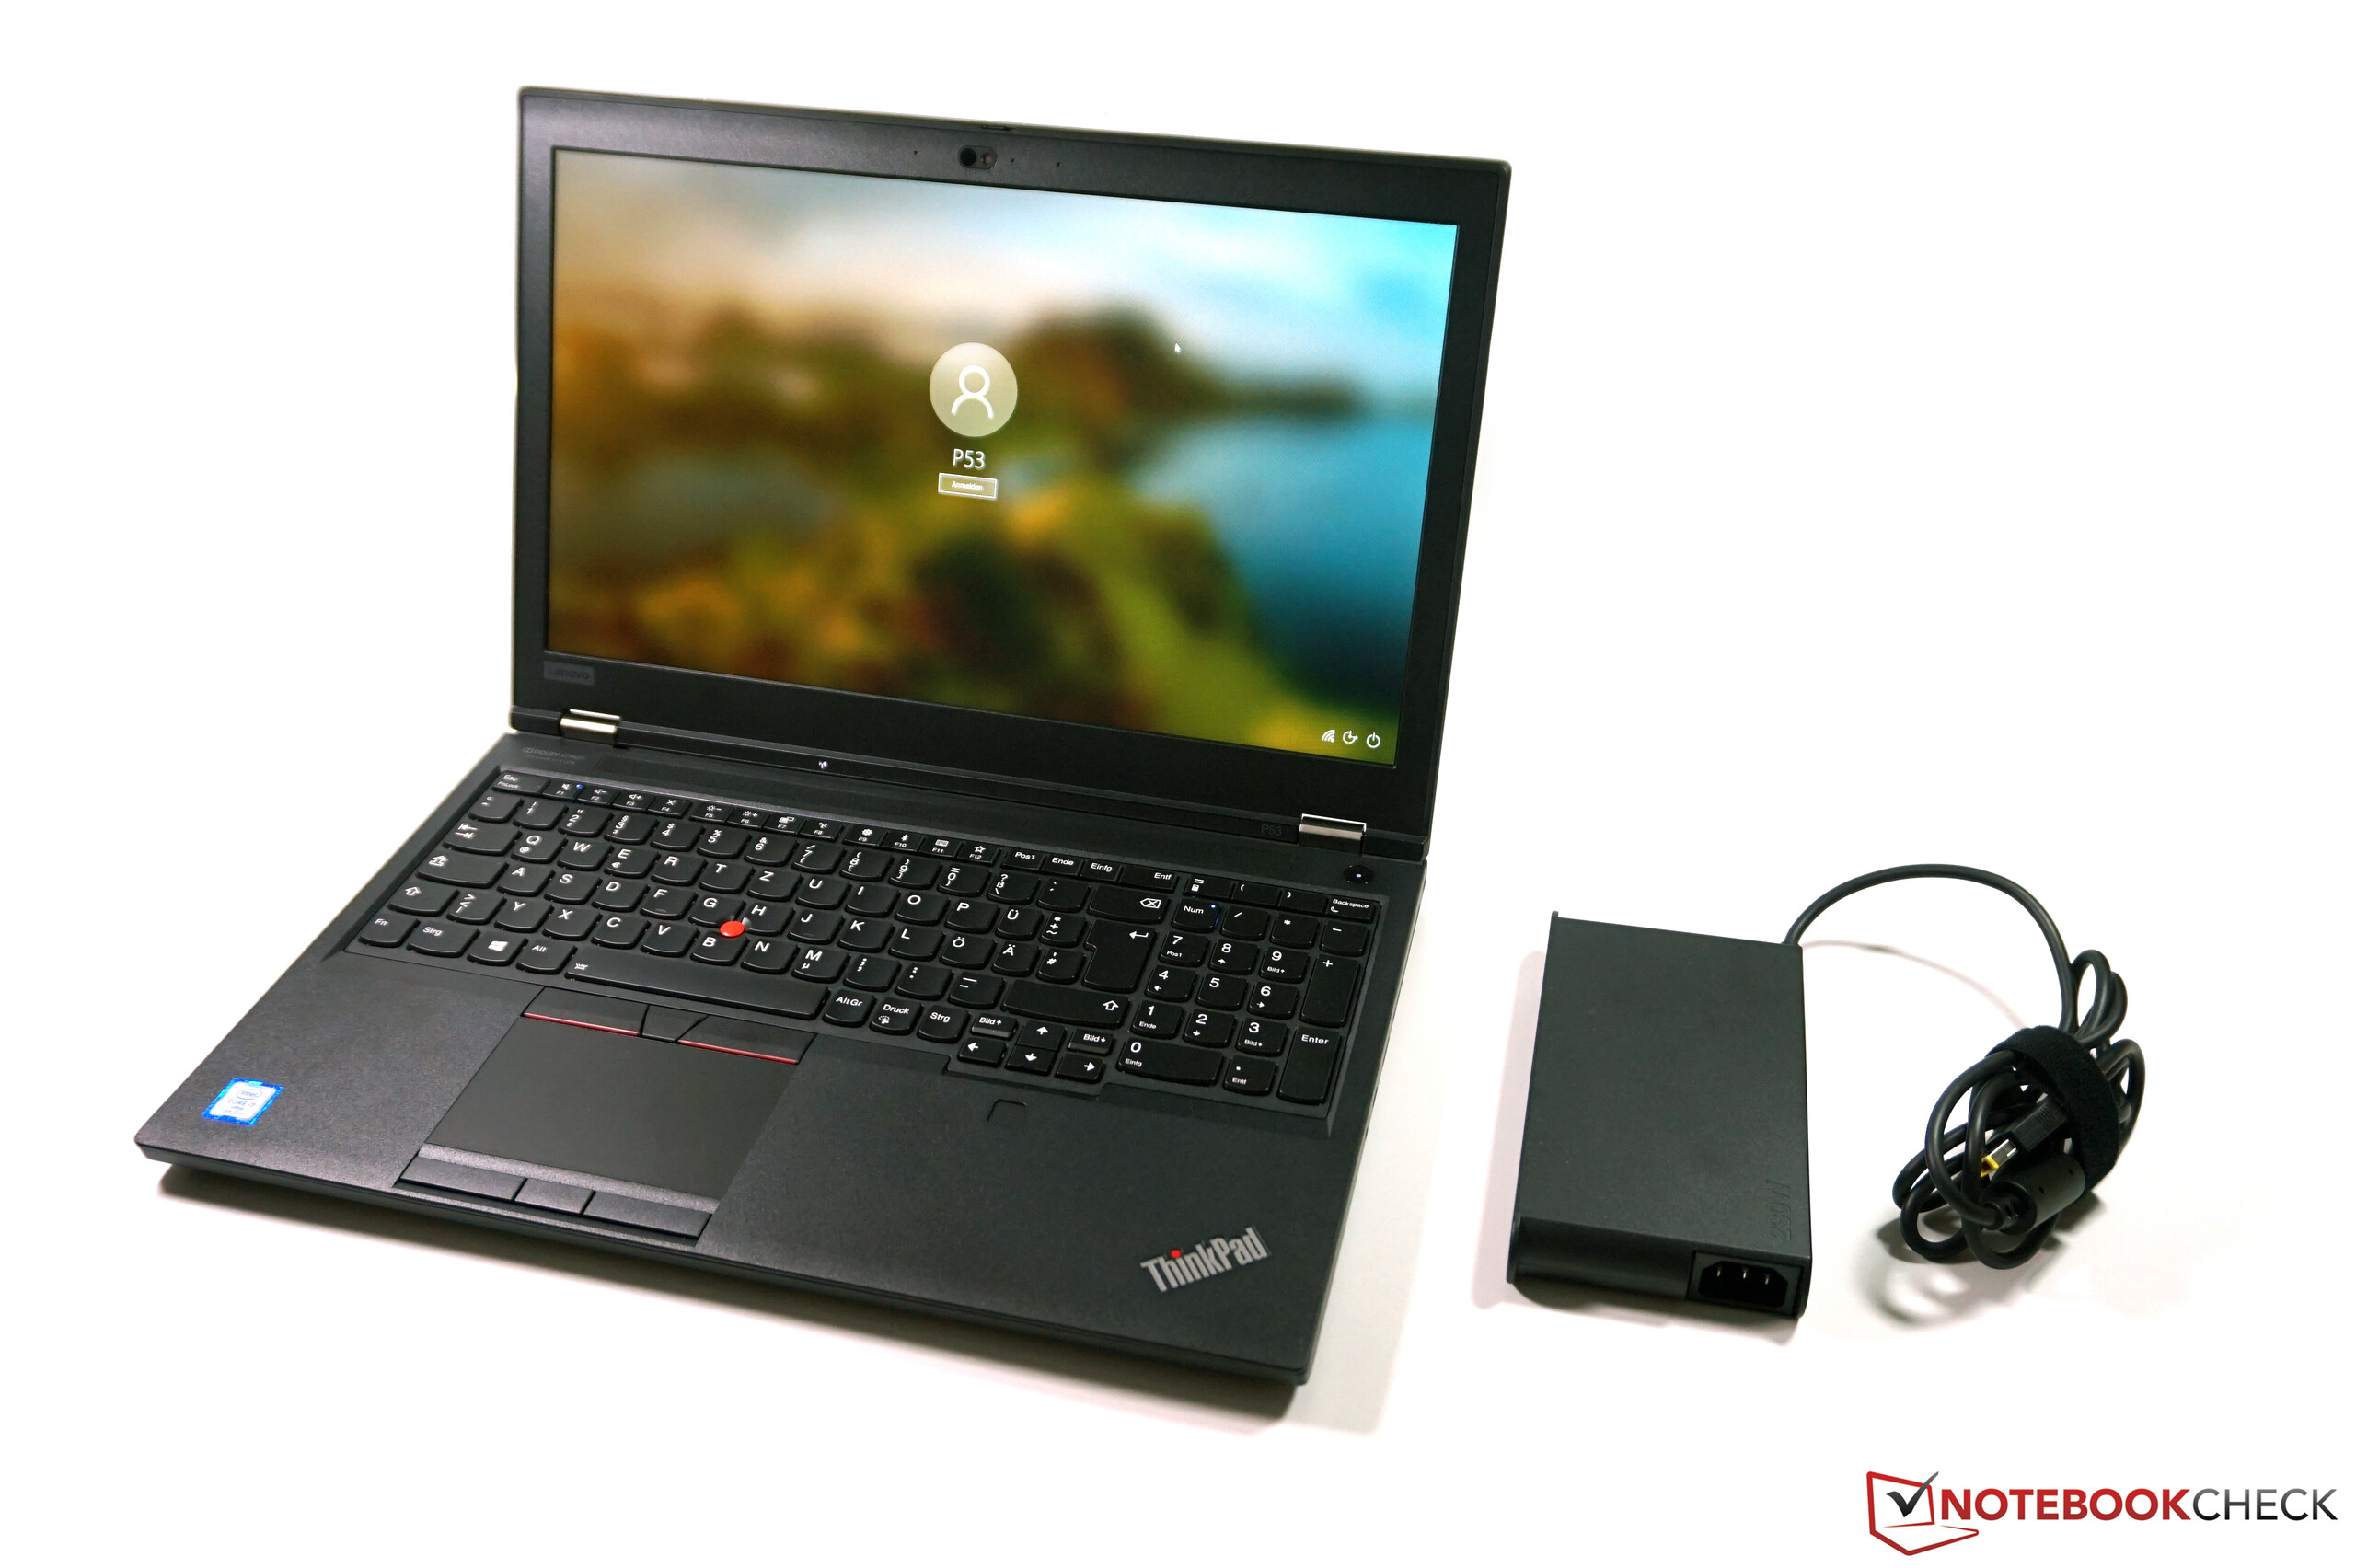 ThinkPad P53 in Classic workstation with a of GPU performance - NotebookCheck.net Reviews